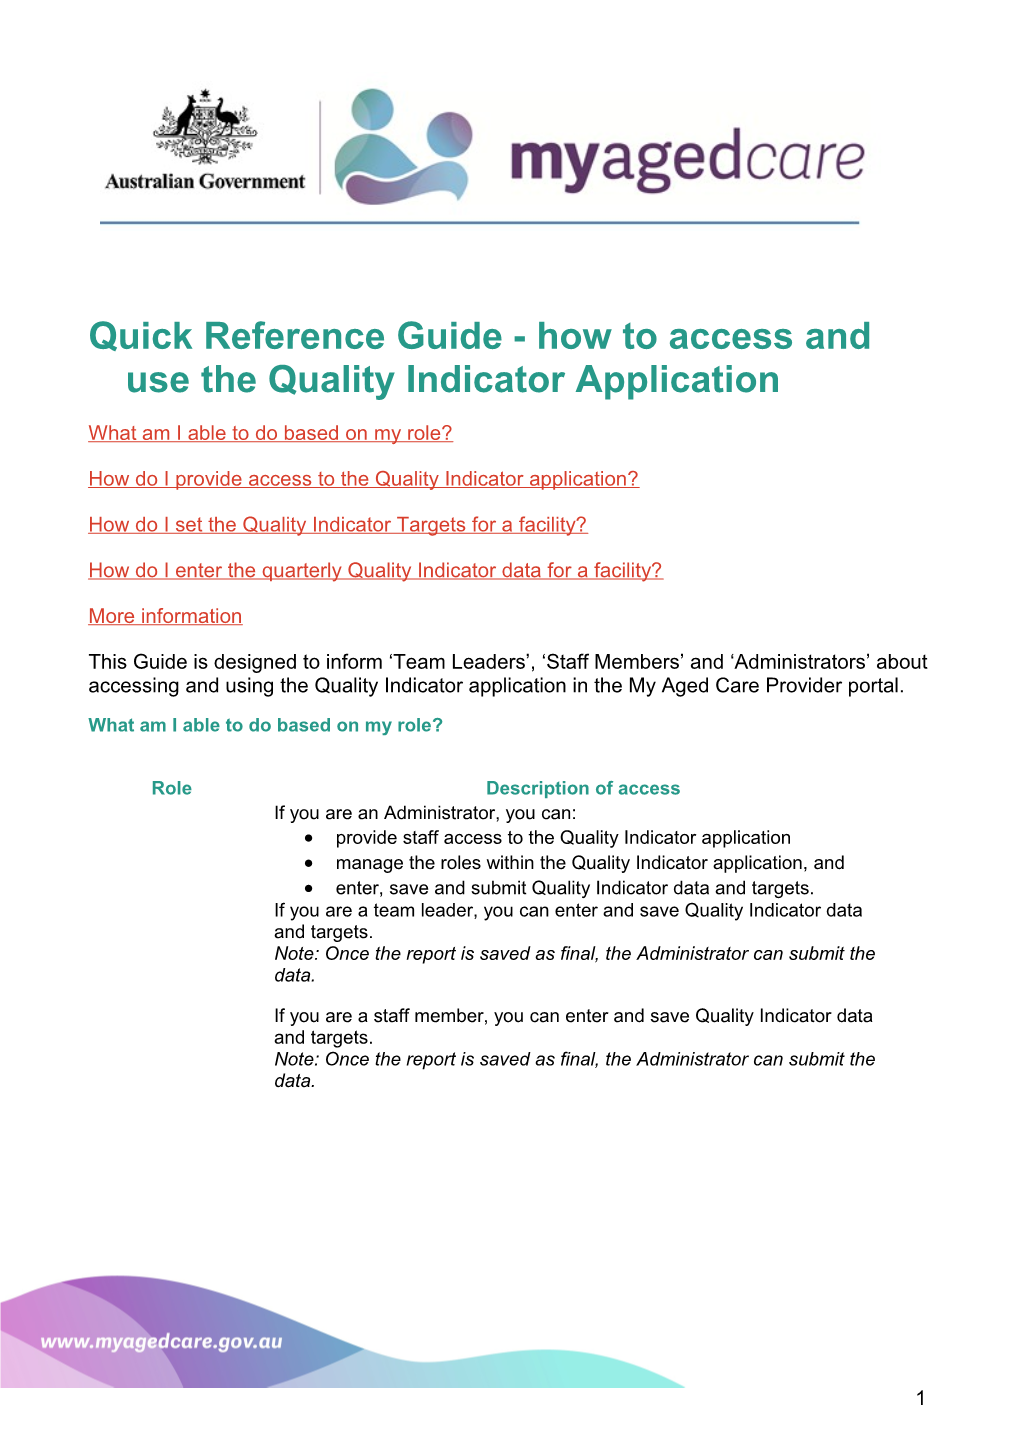 Uick Reference Guide - How to Access and Use the Quality Indicator Application